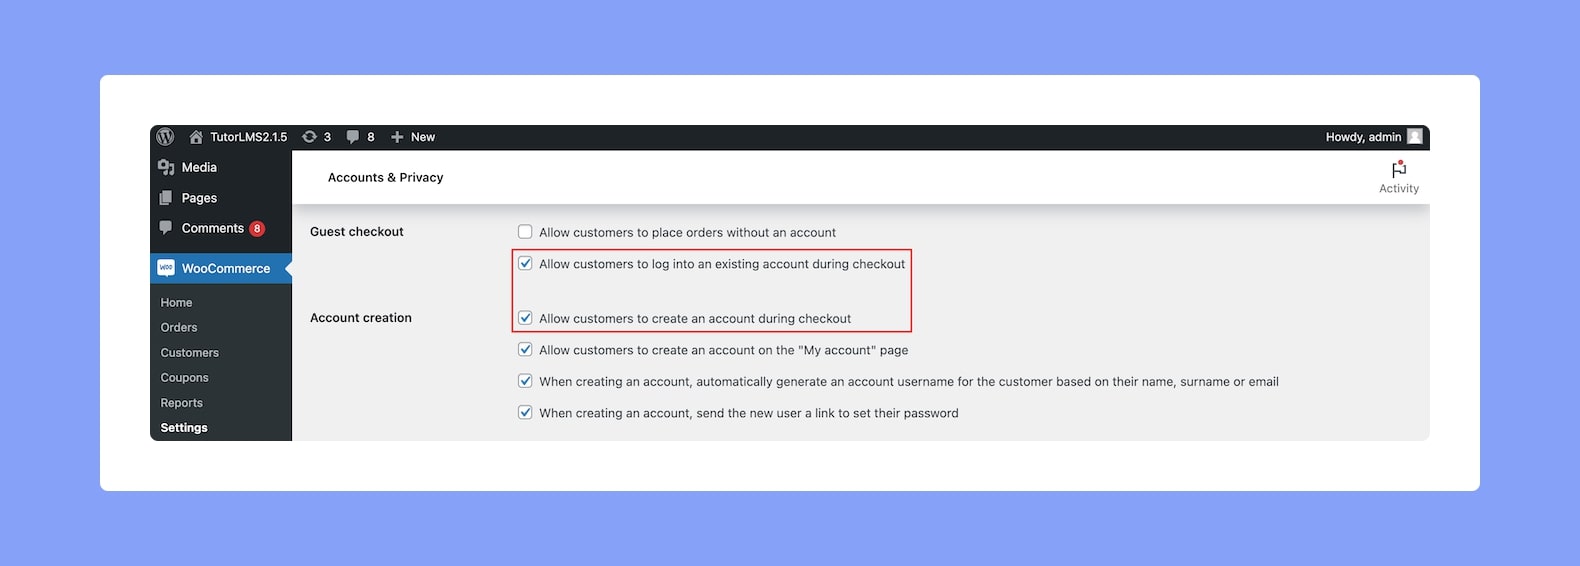 Guest Purchase WooCommerce Settings - Accounts & Privacy